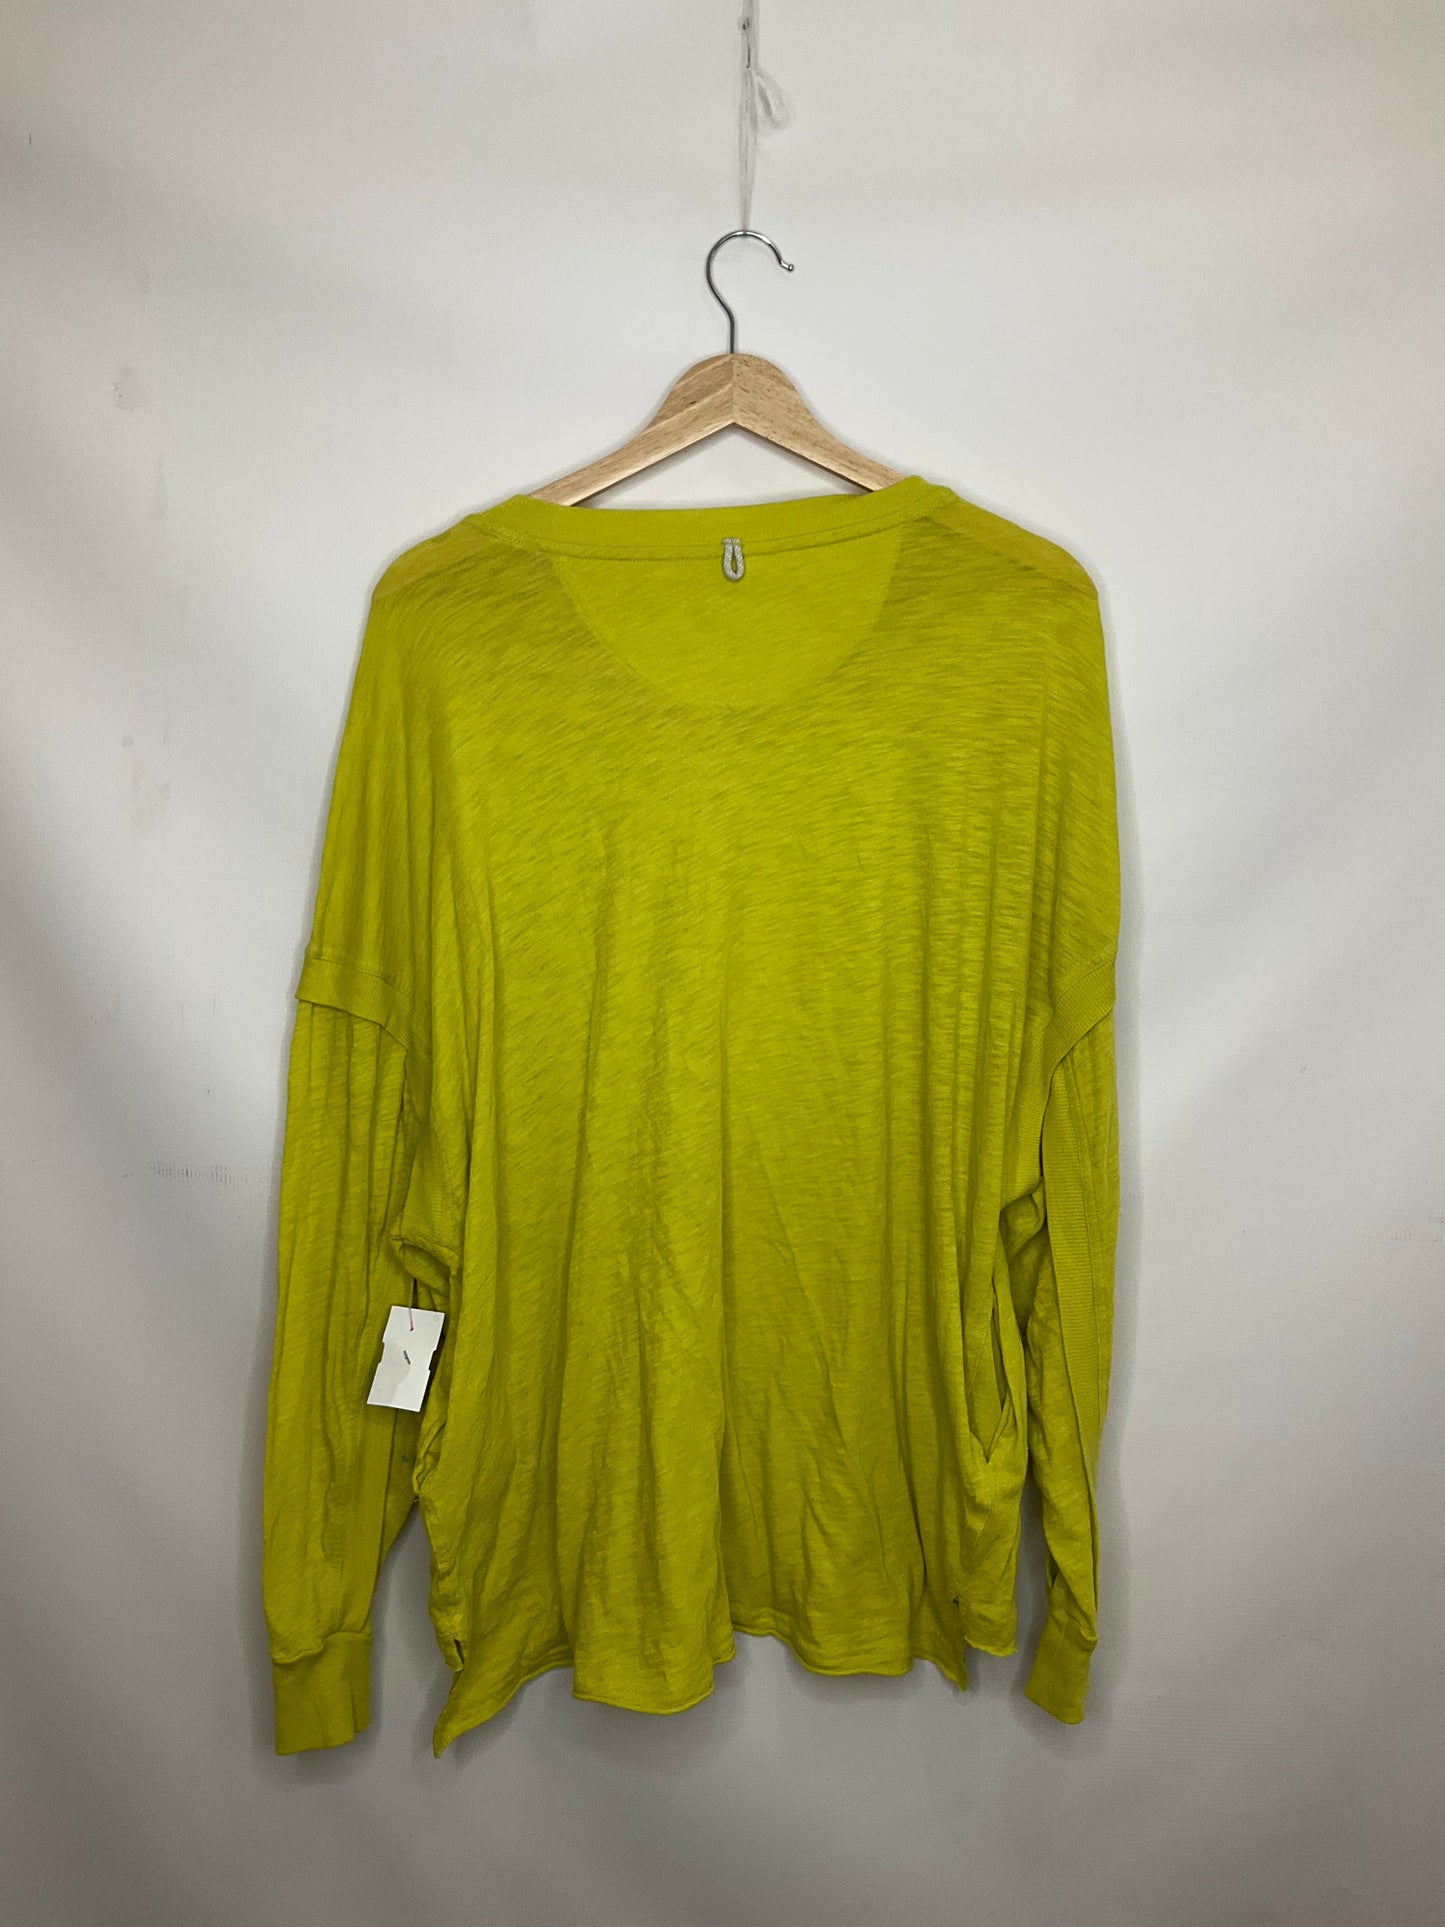 Green Top Long Sleeve Free People, Size S